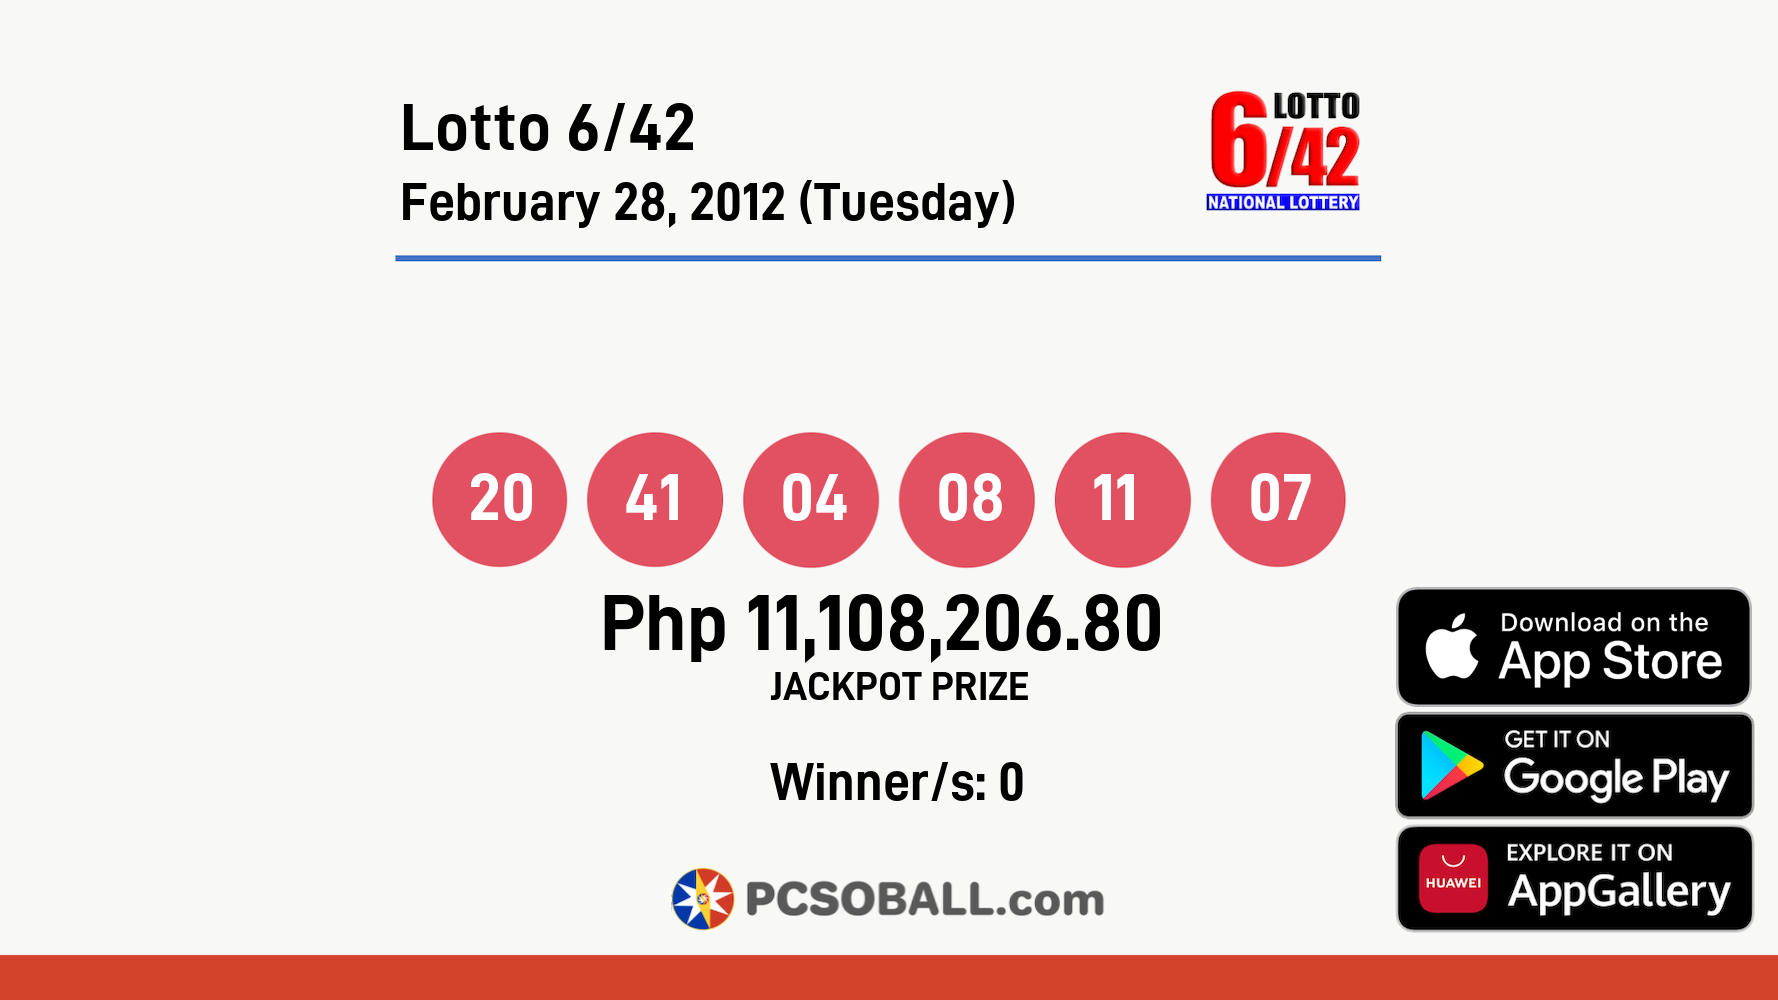 Lotto 6/42 February 28, 2012 (Tuesday) Result